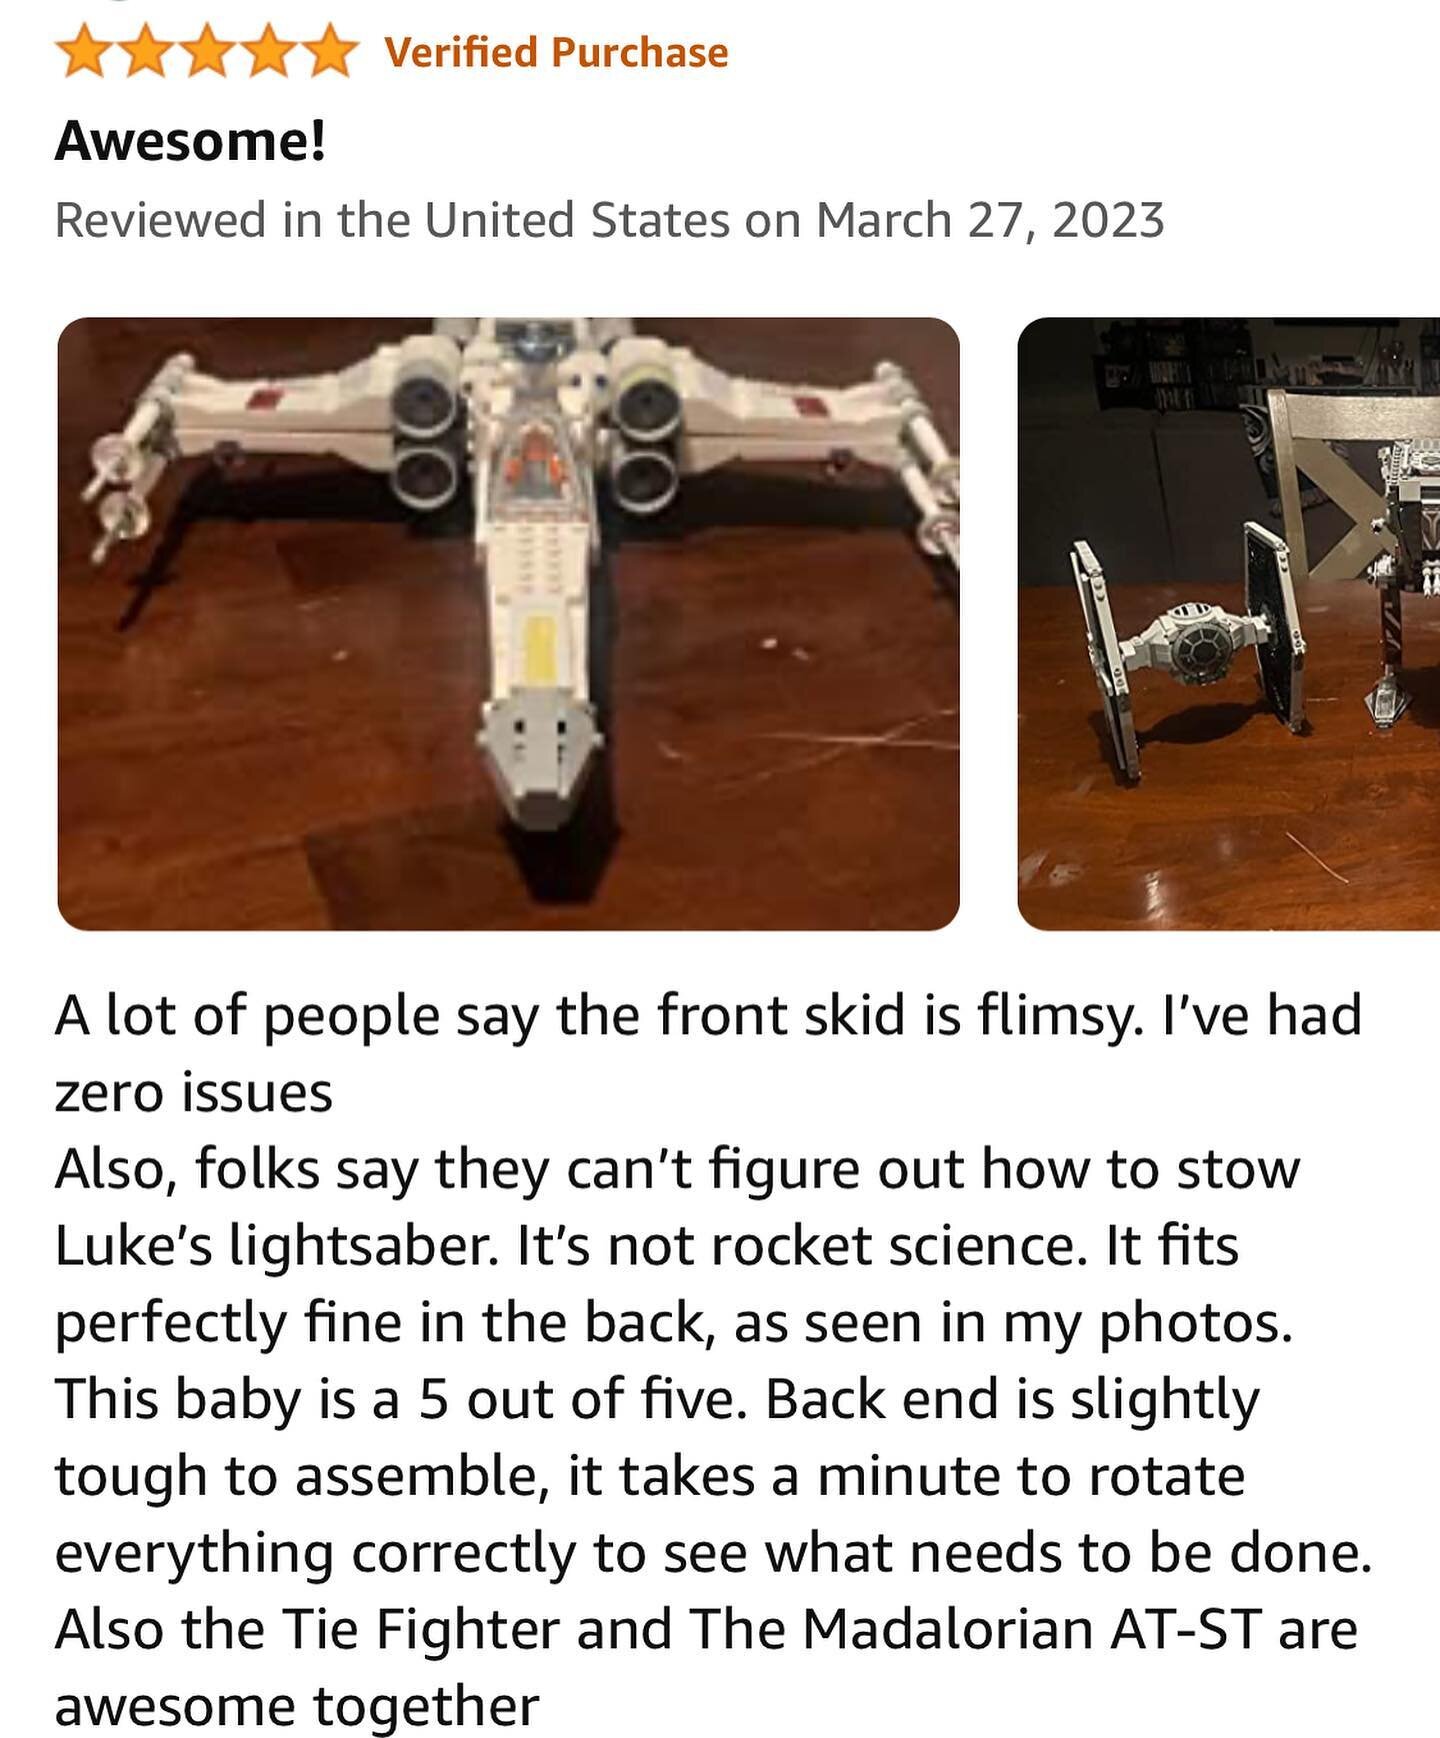 Listen folks, this baby is not ROCKET SCIENCE!

This guy isn't trying to say he's a pro with Lego. He's just more capable than some folks out there. And while it might make you look a little pretentious to say so in an Amazon review, when we step bac